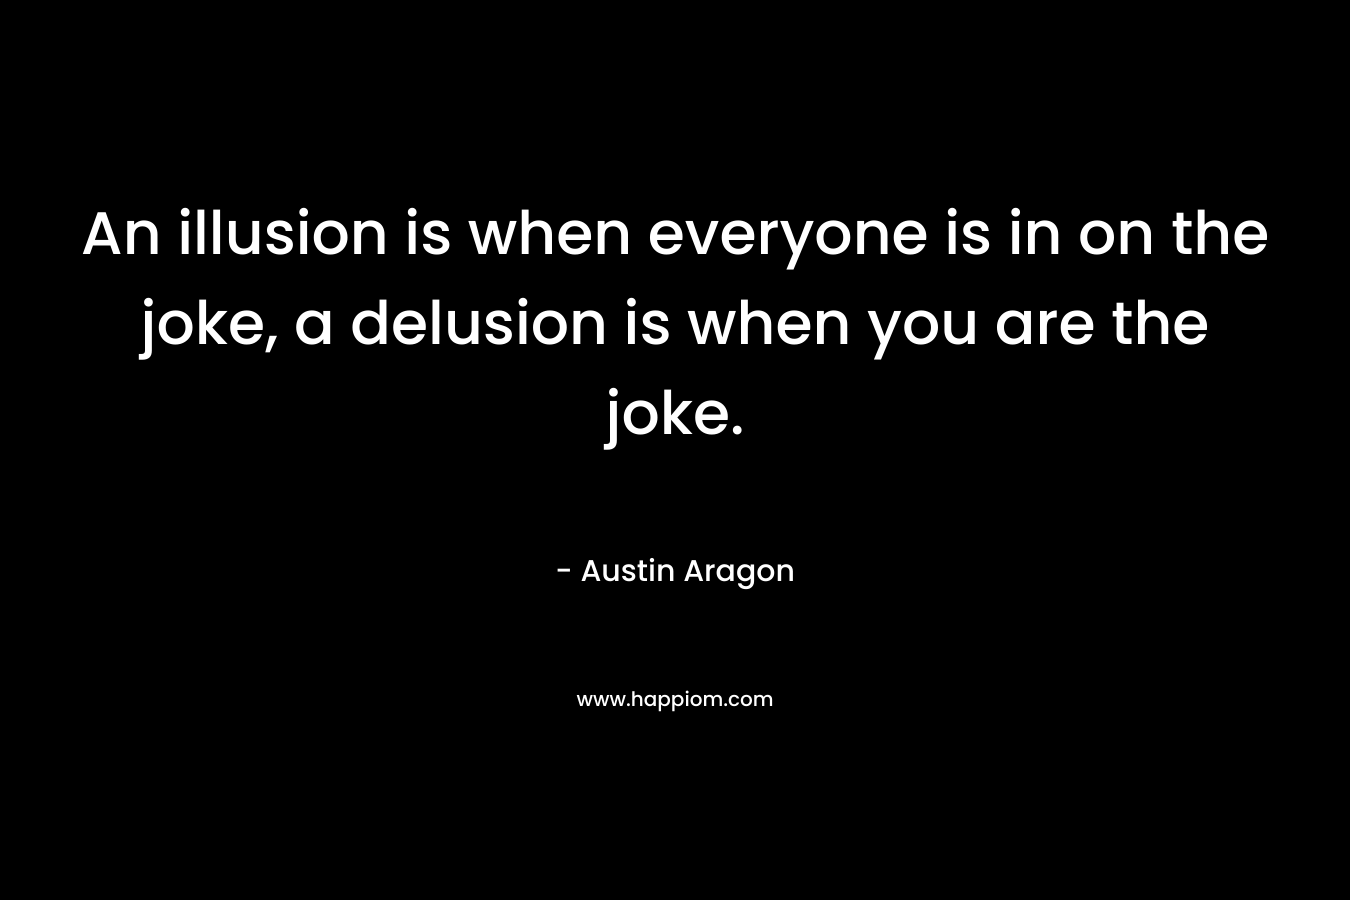 An illusion is when everyone is in on the joke, a delusion is when you are the joke. – Austin Aragon